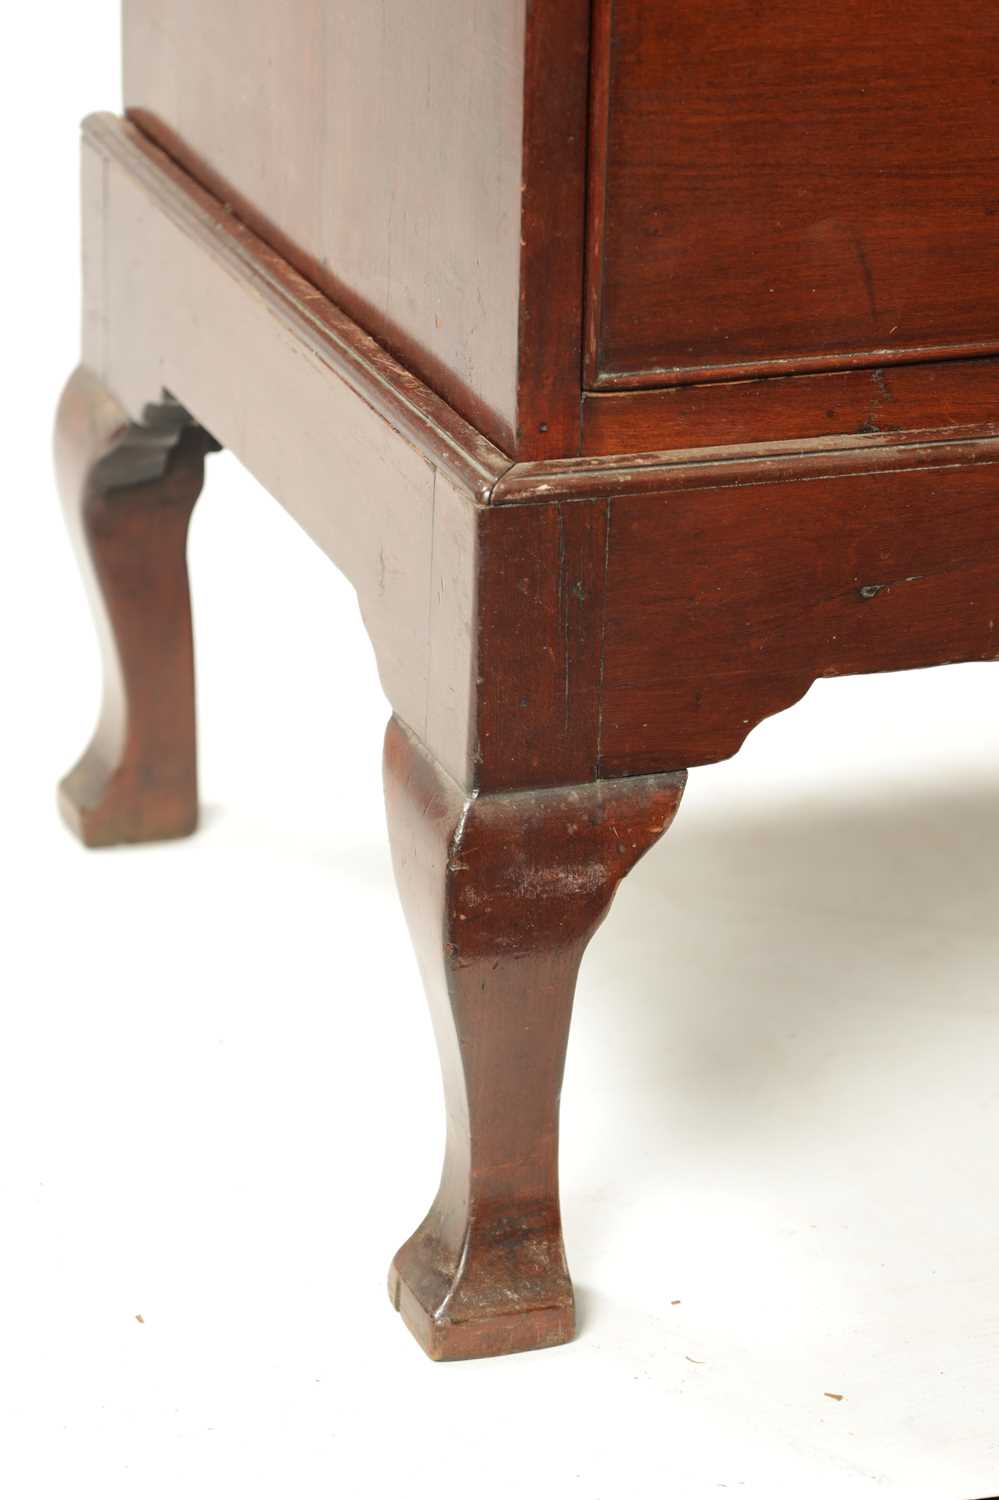 AN UNUSUAL AND RARE EARLY 18TH CENTURY RED WALNUT CHEST ON STAND POSSIBLY AMERICAN - Image 6 of 7